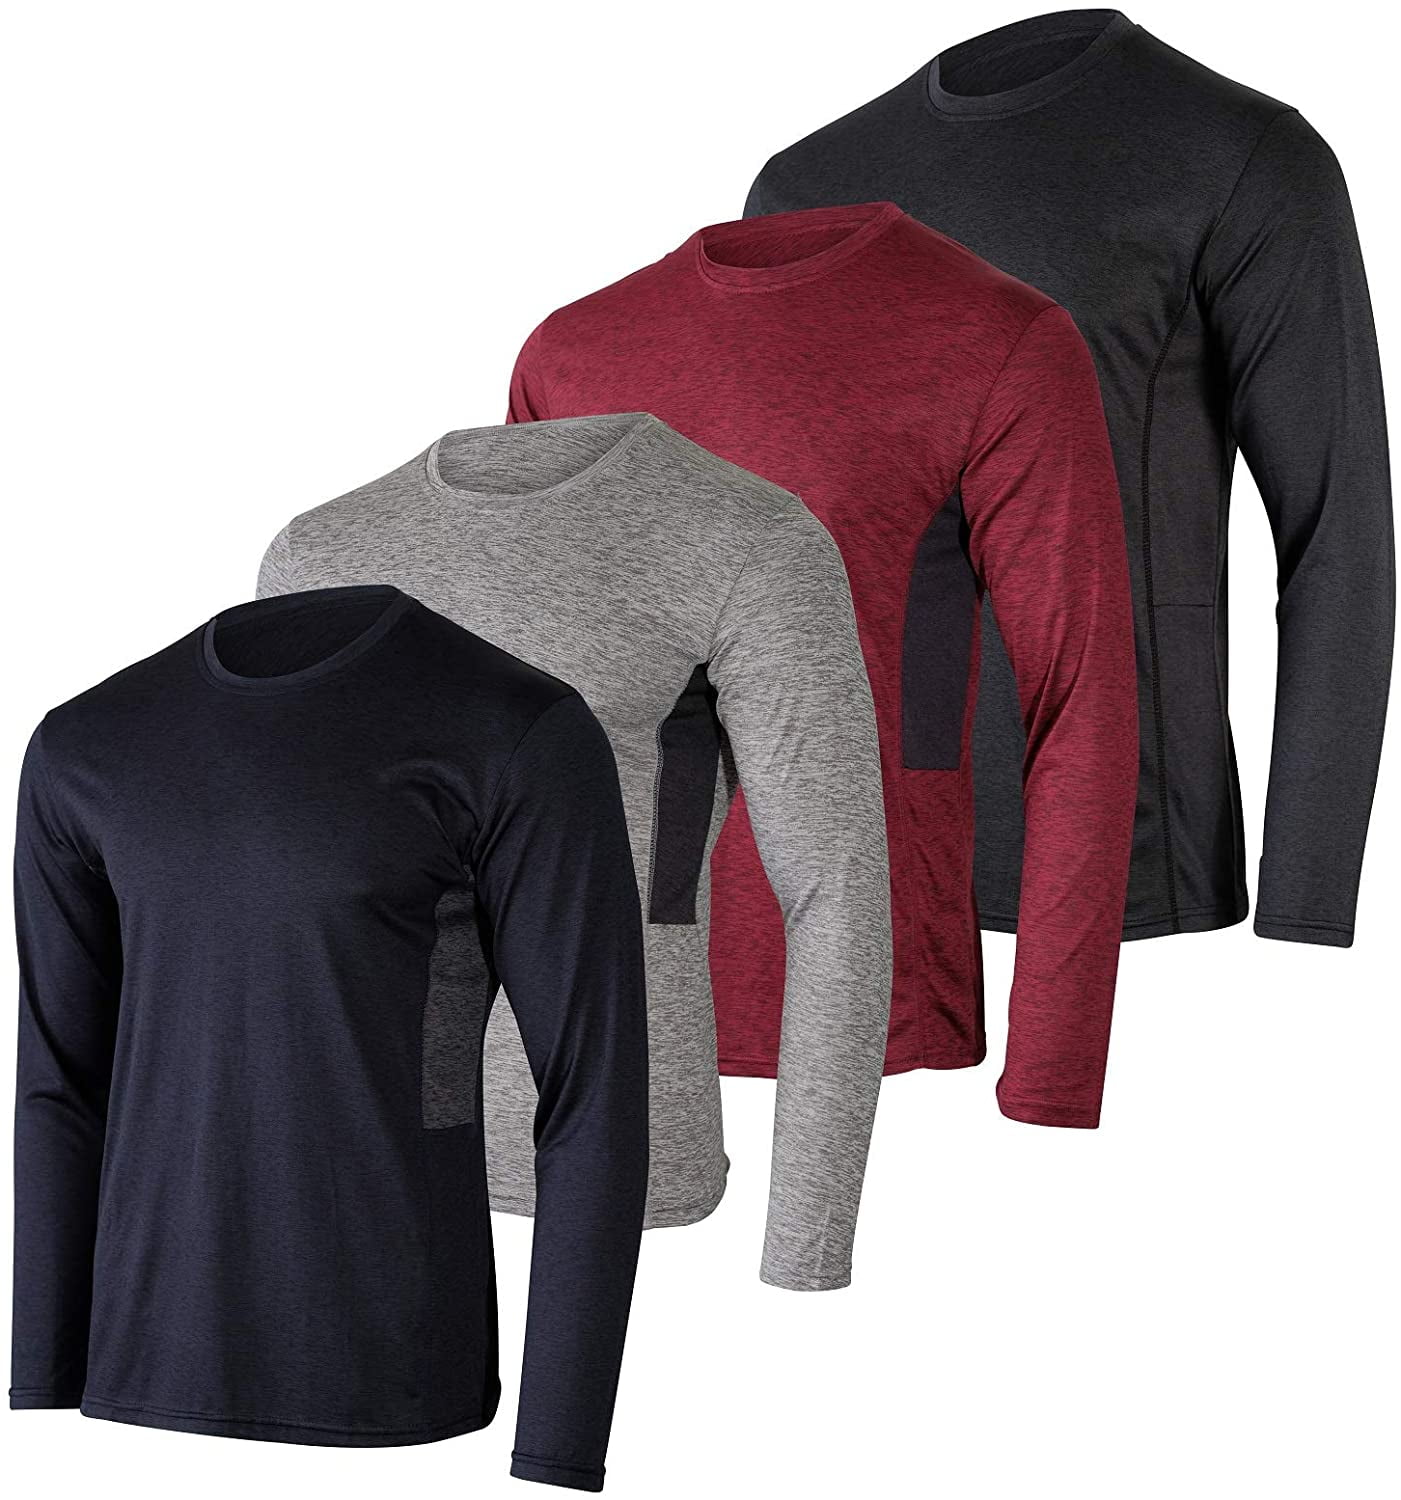 Real Essentials 4 Pack: Men's Dry-Fit Moisture Wicking Performance Long  Sleeve T-Shirt, UV Sun Protection Outdoor Active Top 